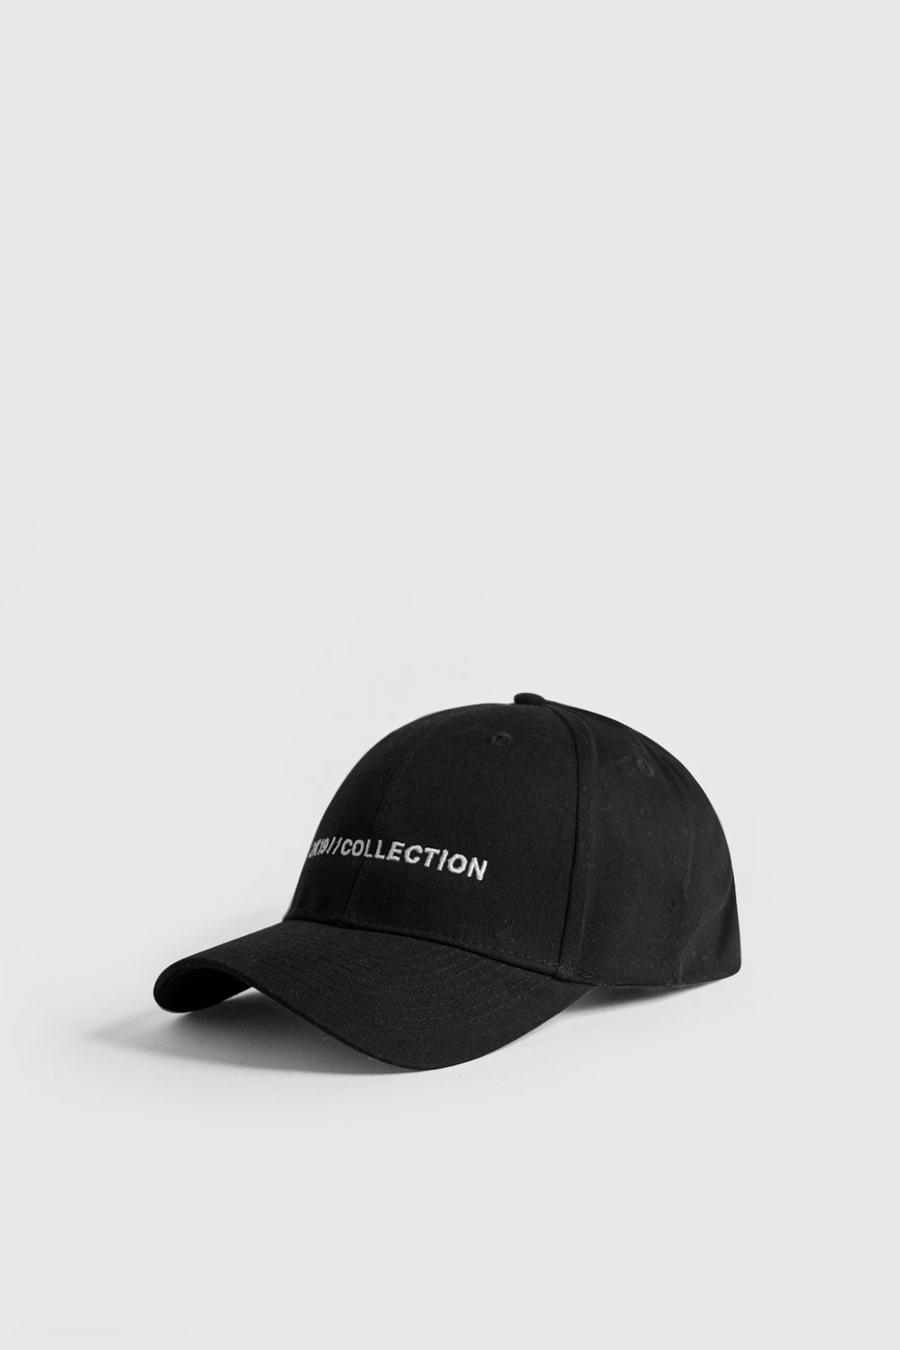 Casquette brodée collection MAN 2K19 image number 1